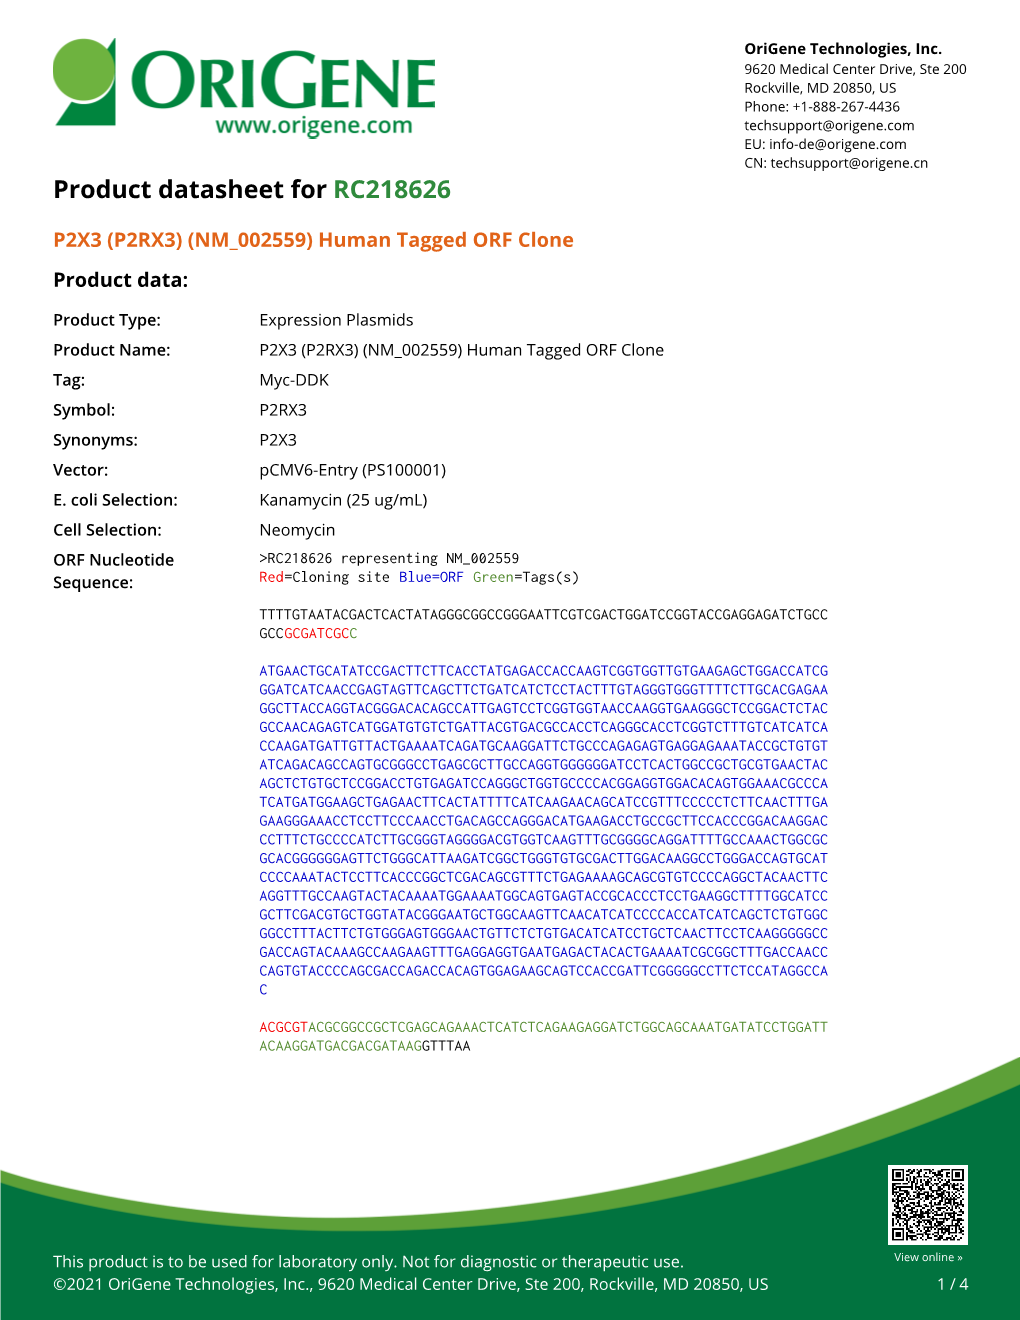 P2X3 (P2RX3) (NM 002559) Human Tagged ORF Clone Product Data